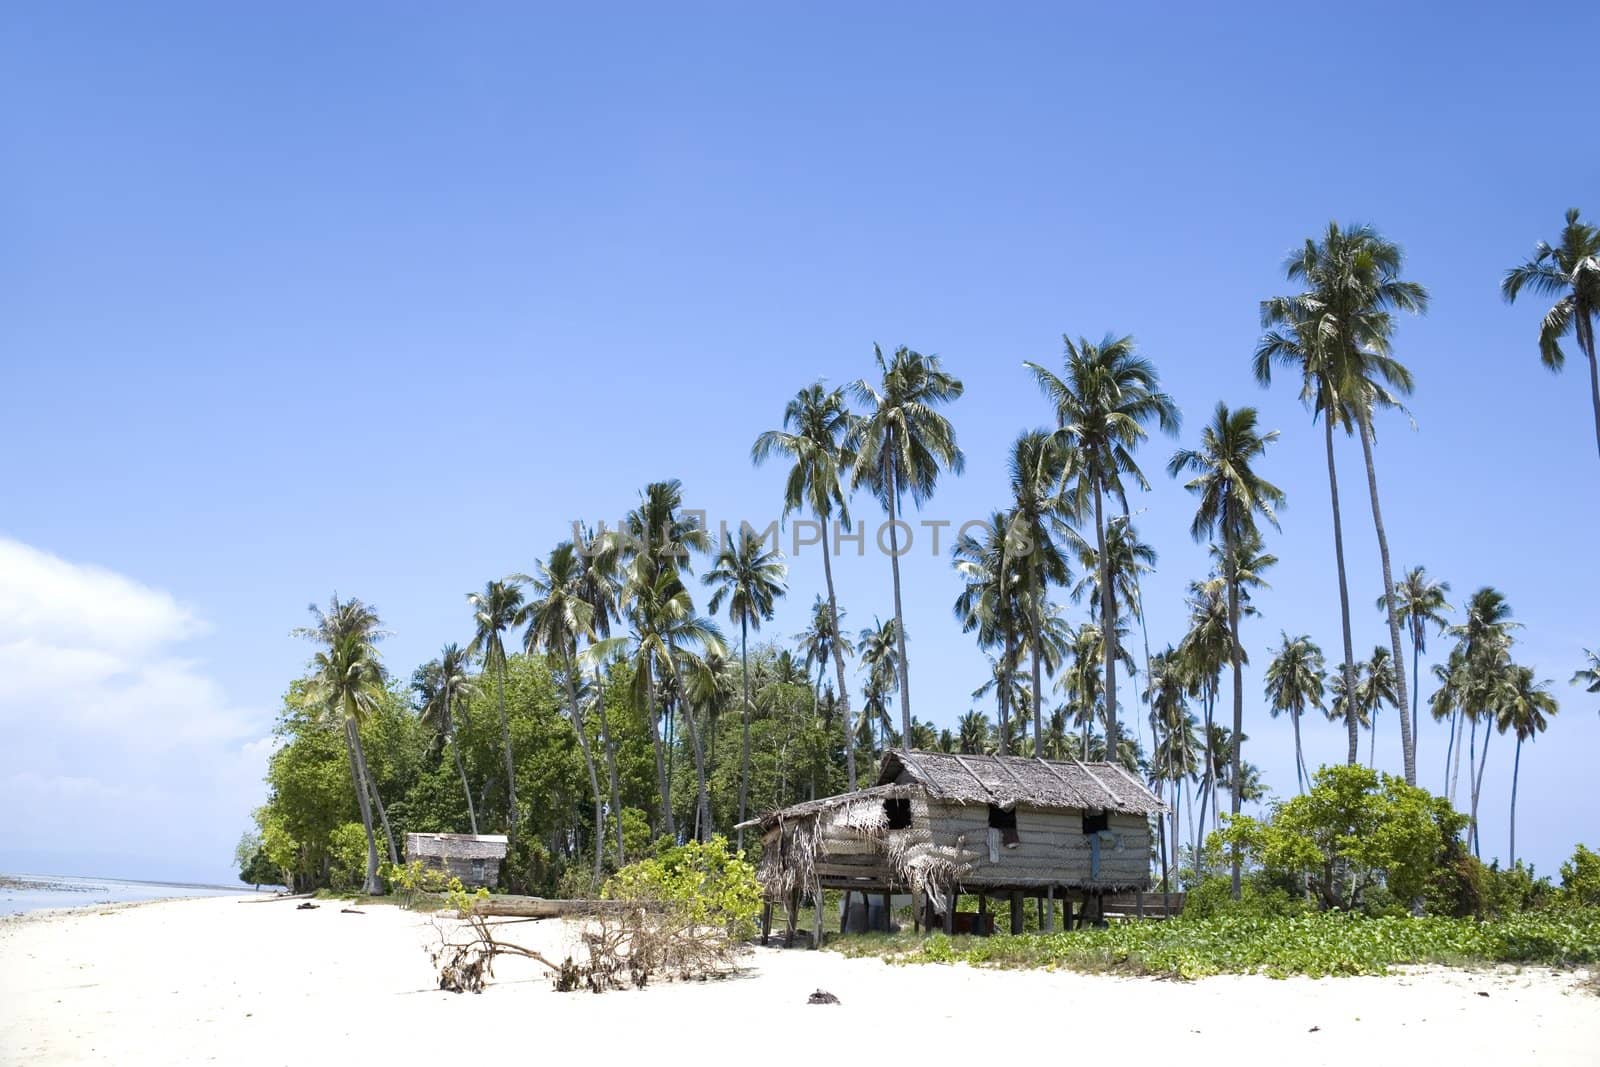 Image of native huts on a tropical island in Malaysia.